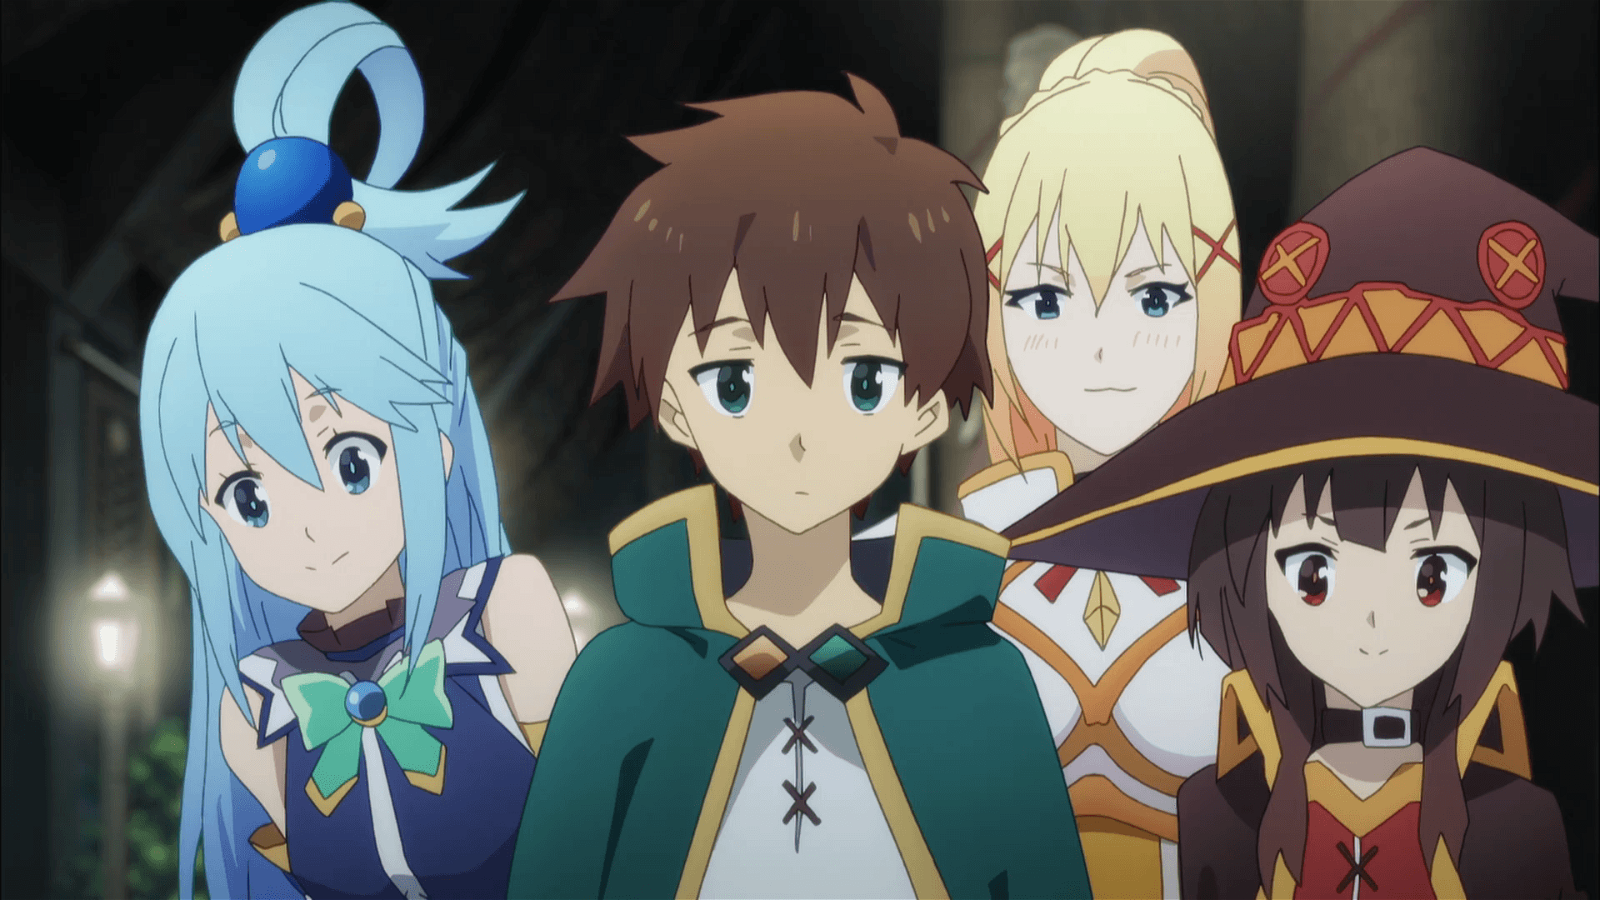 How many episodes in KonoSuba: An Explosion on This Wonderful World?